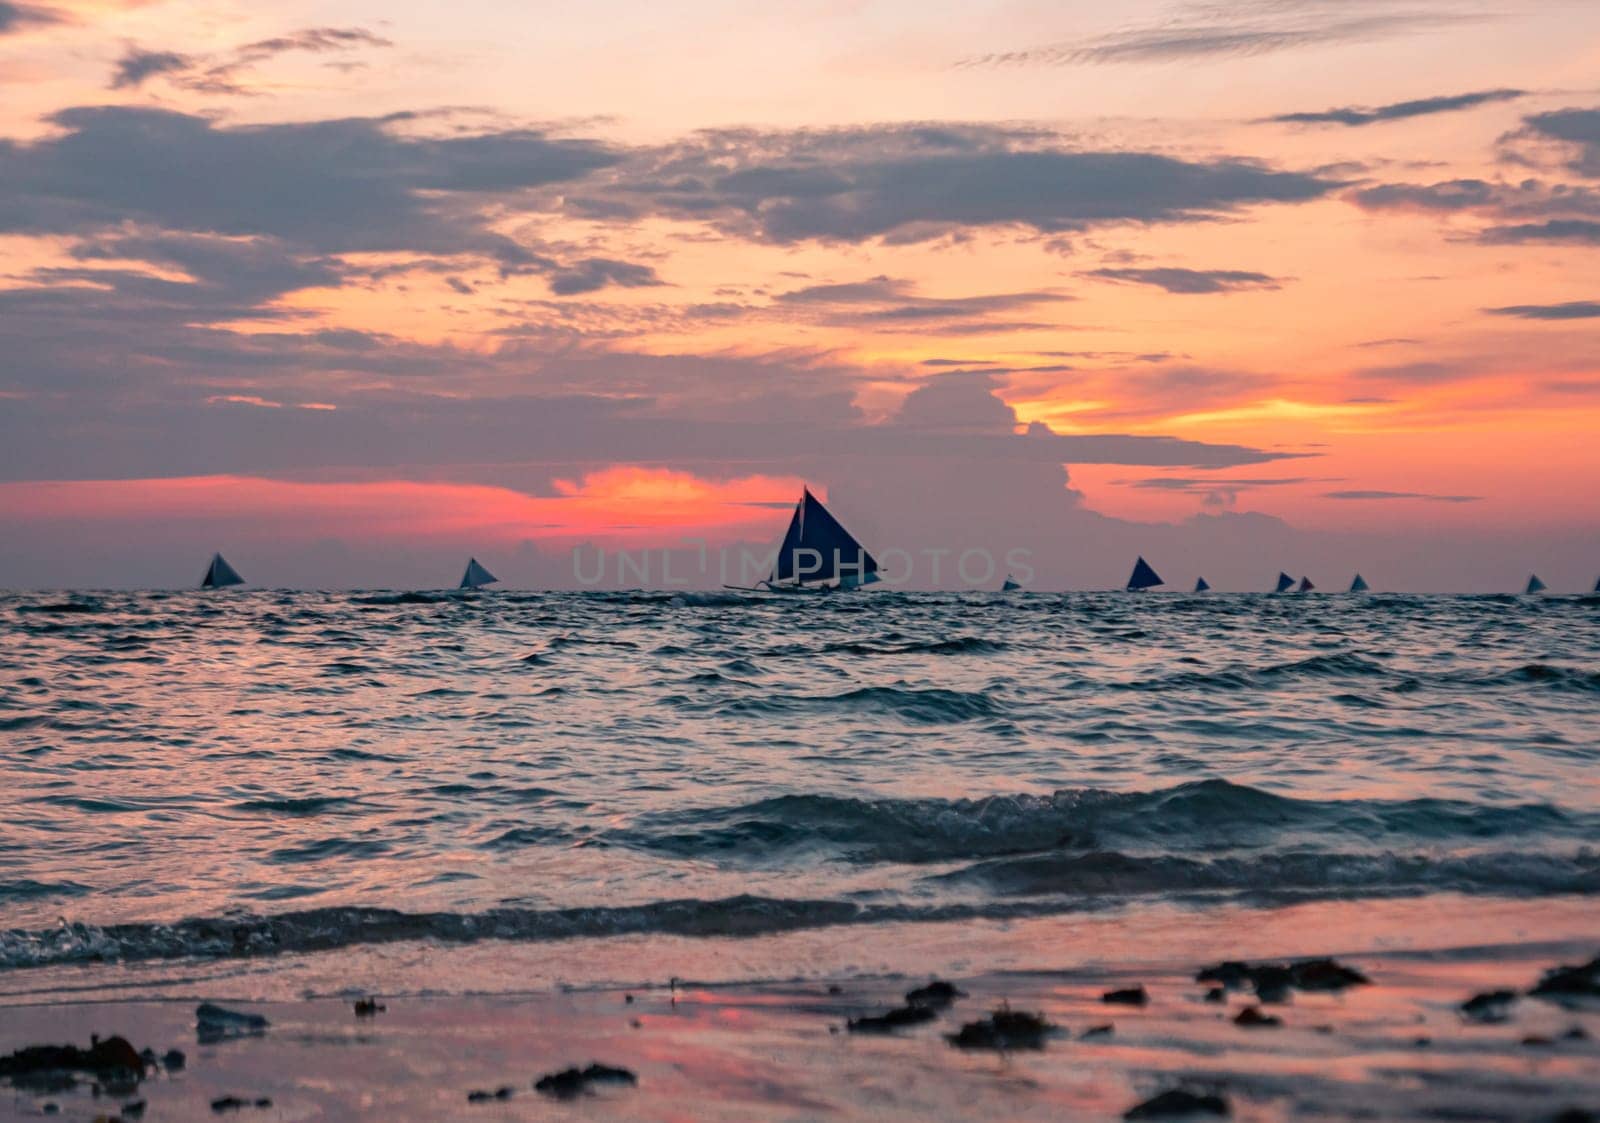 Calm evening on a sandy beach with boats sailing in the distance. Boracay, Philippines. by Busker